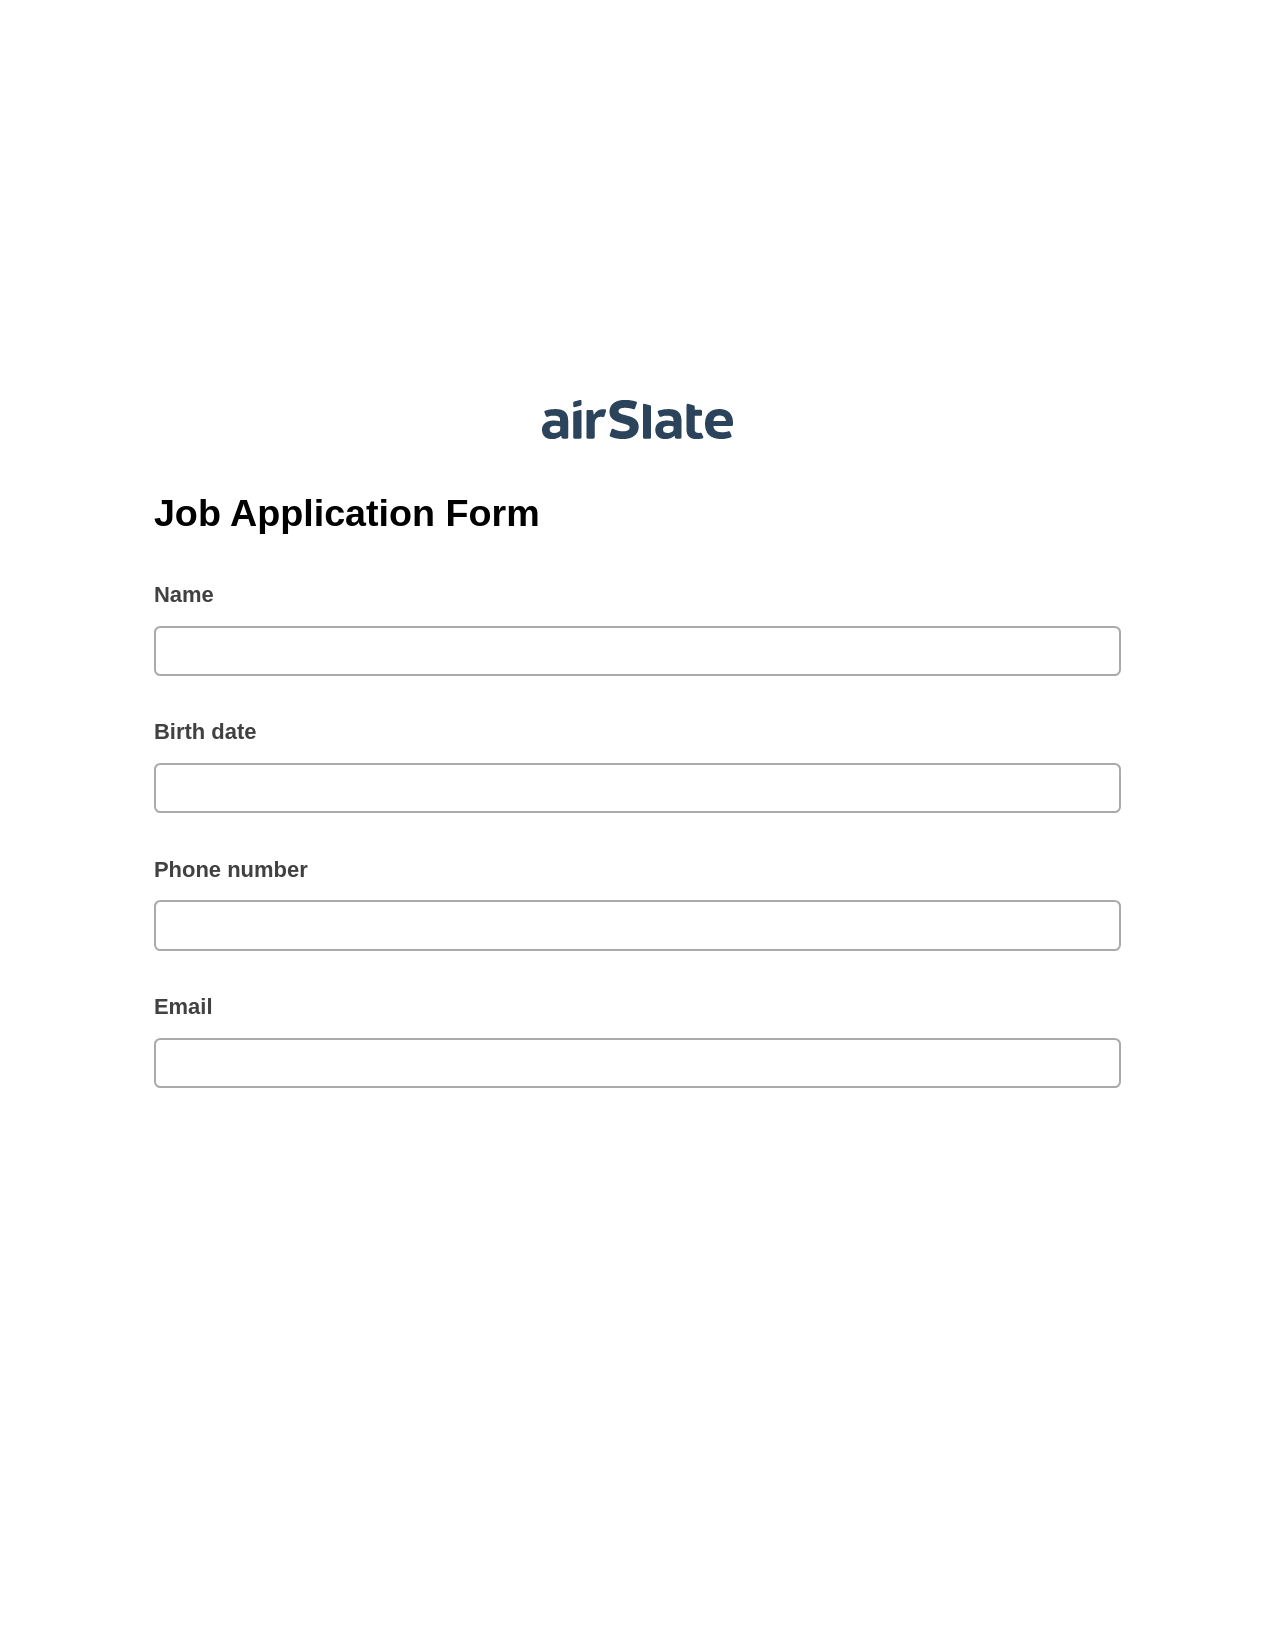 Multirole Job Application Form Pre-fill from CSV File Dropdown Options Bot, Assign Roles to Recipients Bot, Export to Google Sheet Bot